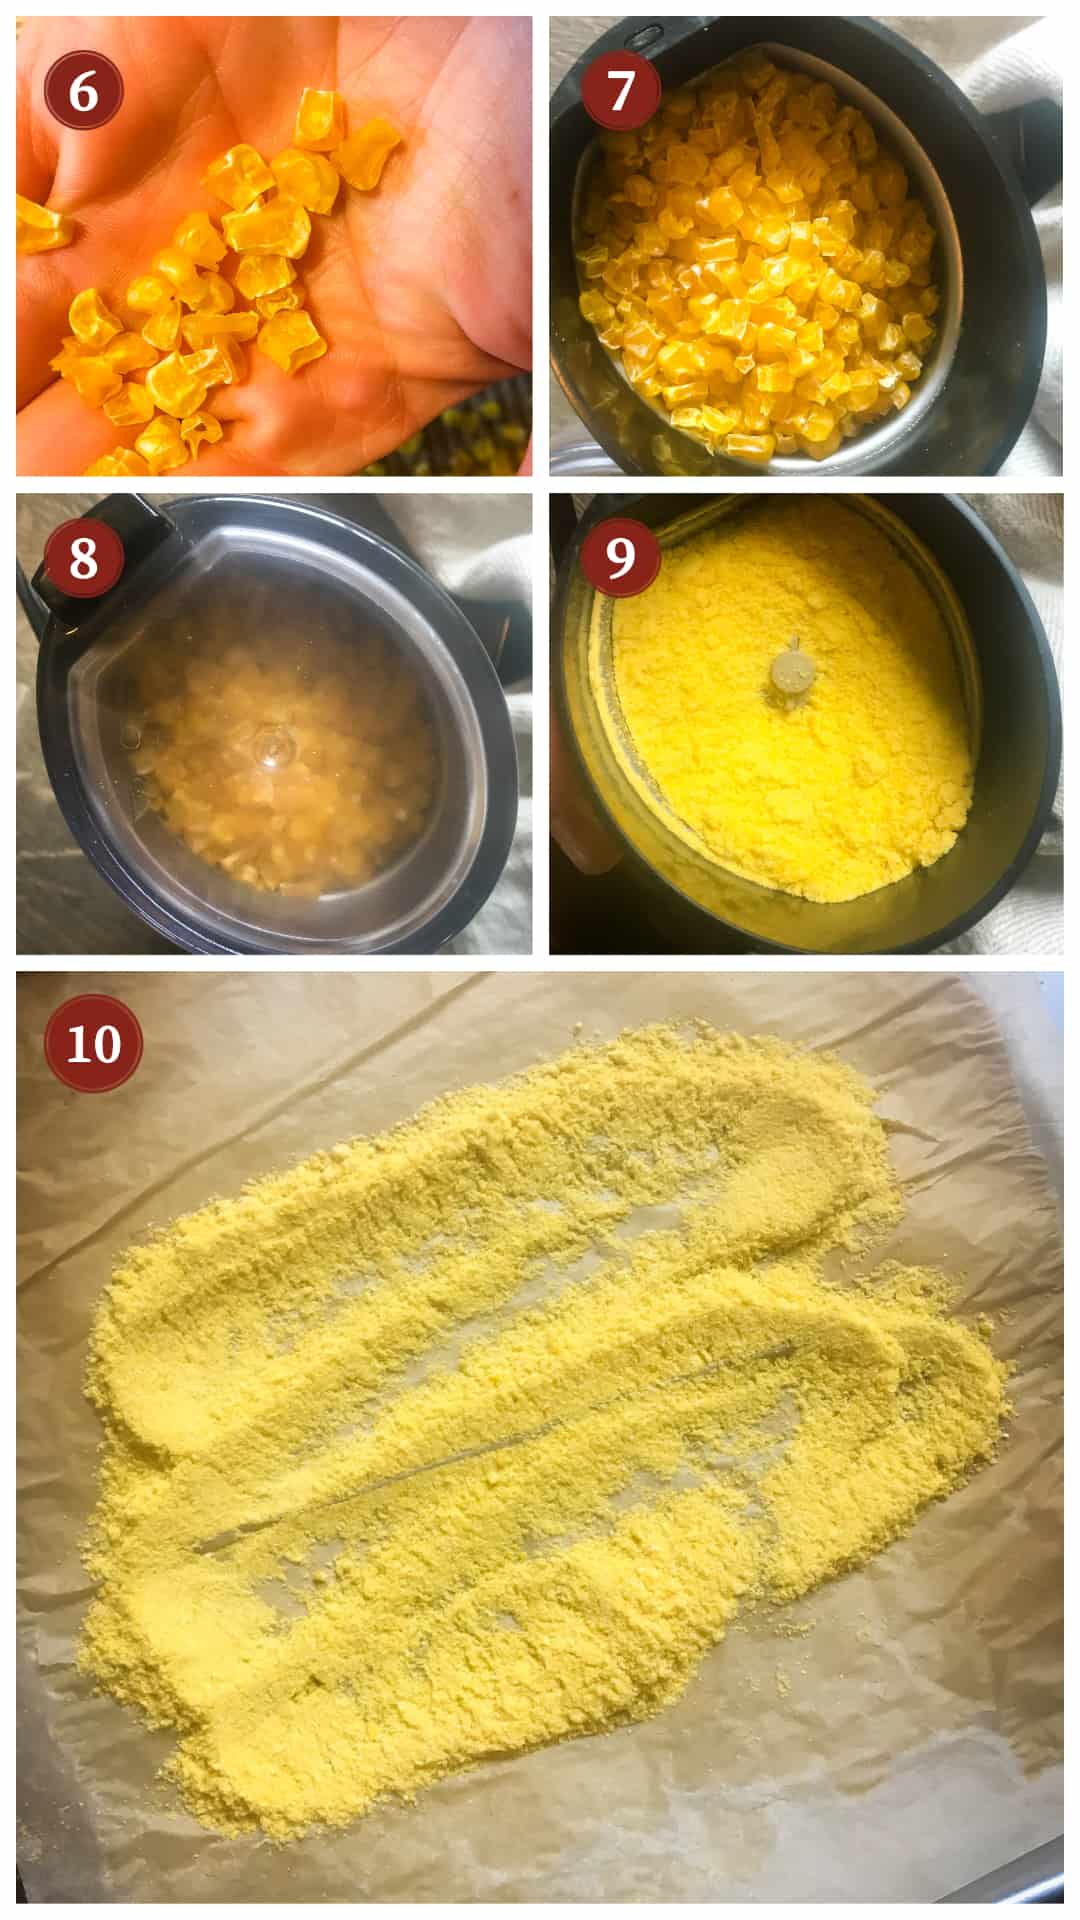 a process collage of the steps to make homemade cornmeal, steps 6 - 10